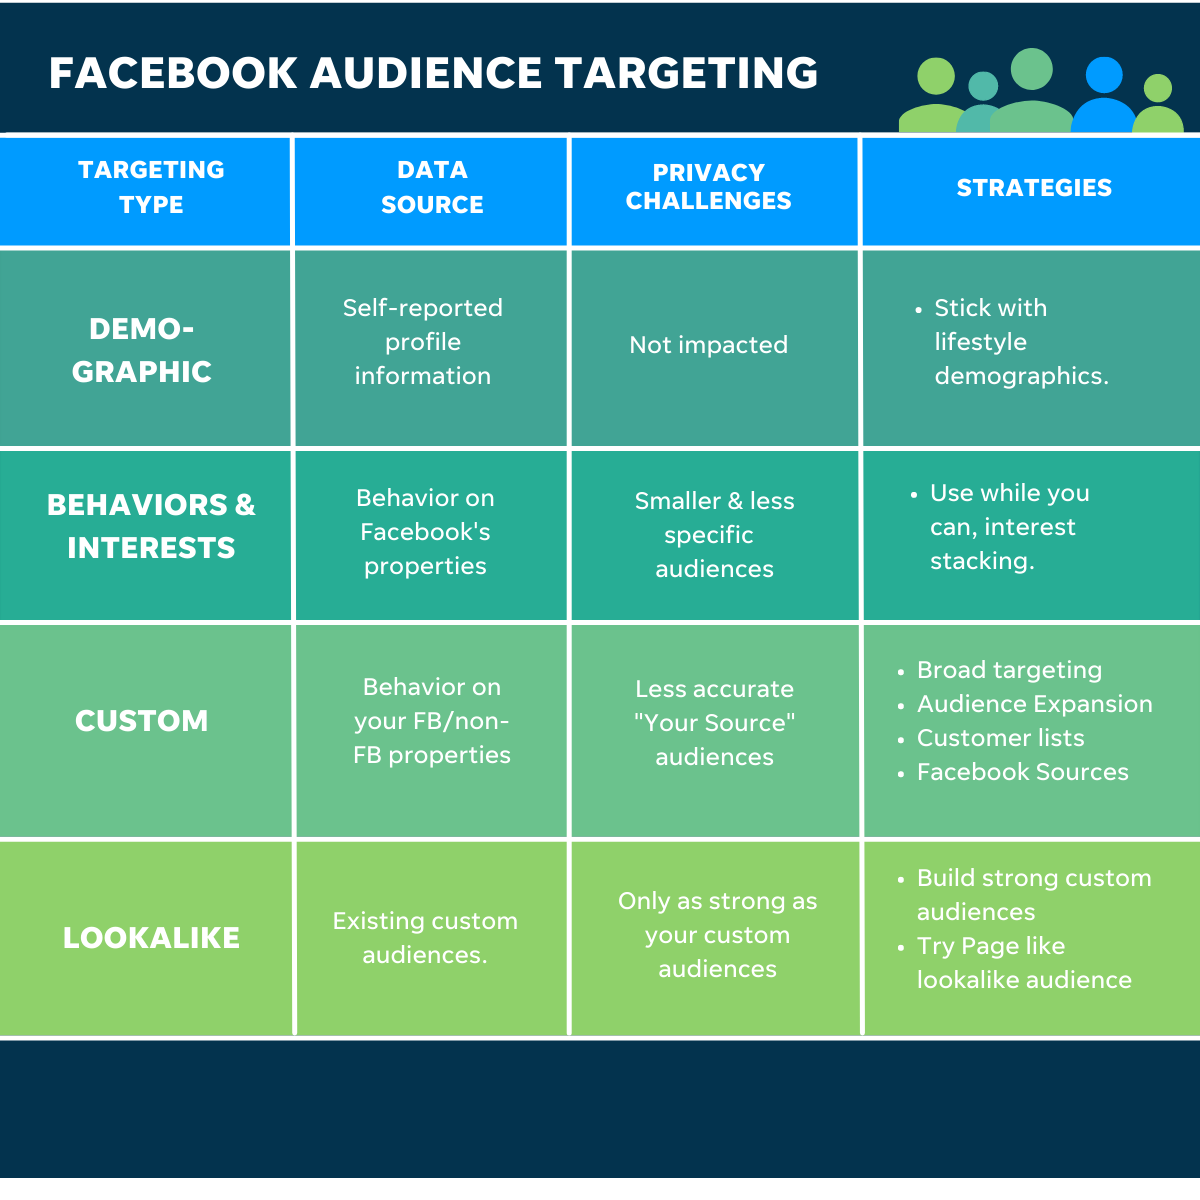 Table that compares the different types of Facebook audience targeting, including their data source, targeting challenges, and strategies.